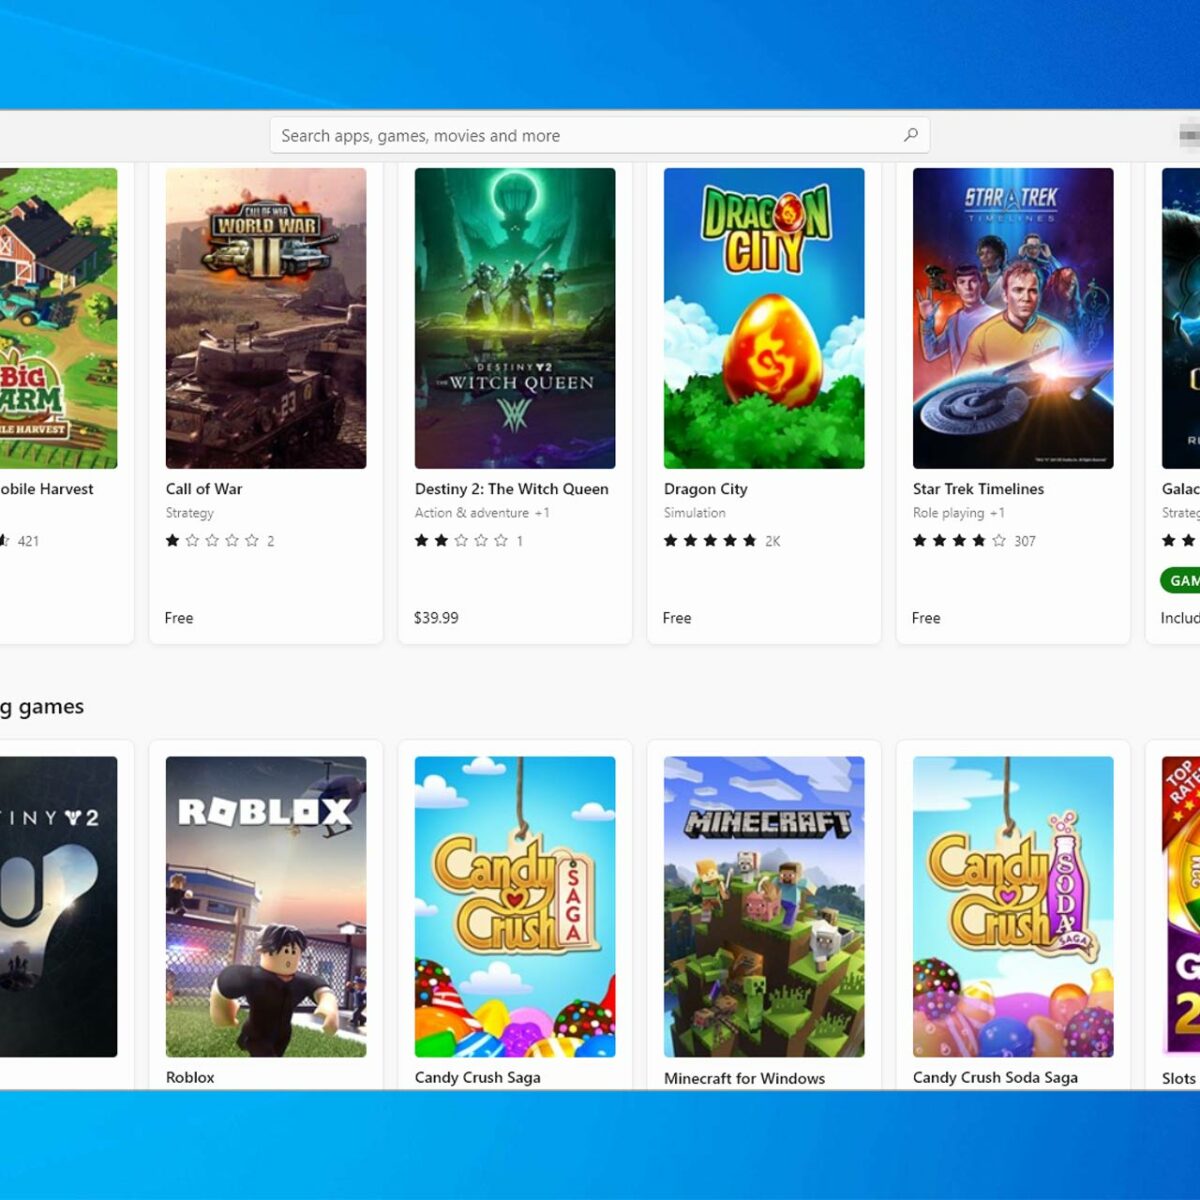 Top Rated Free Games from the Windows 10 Store